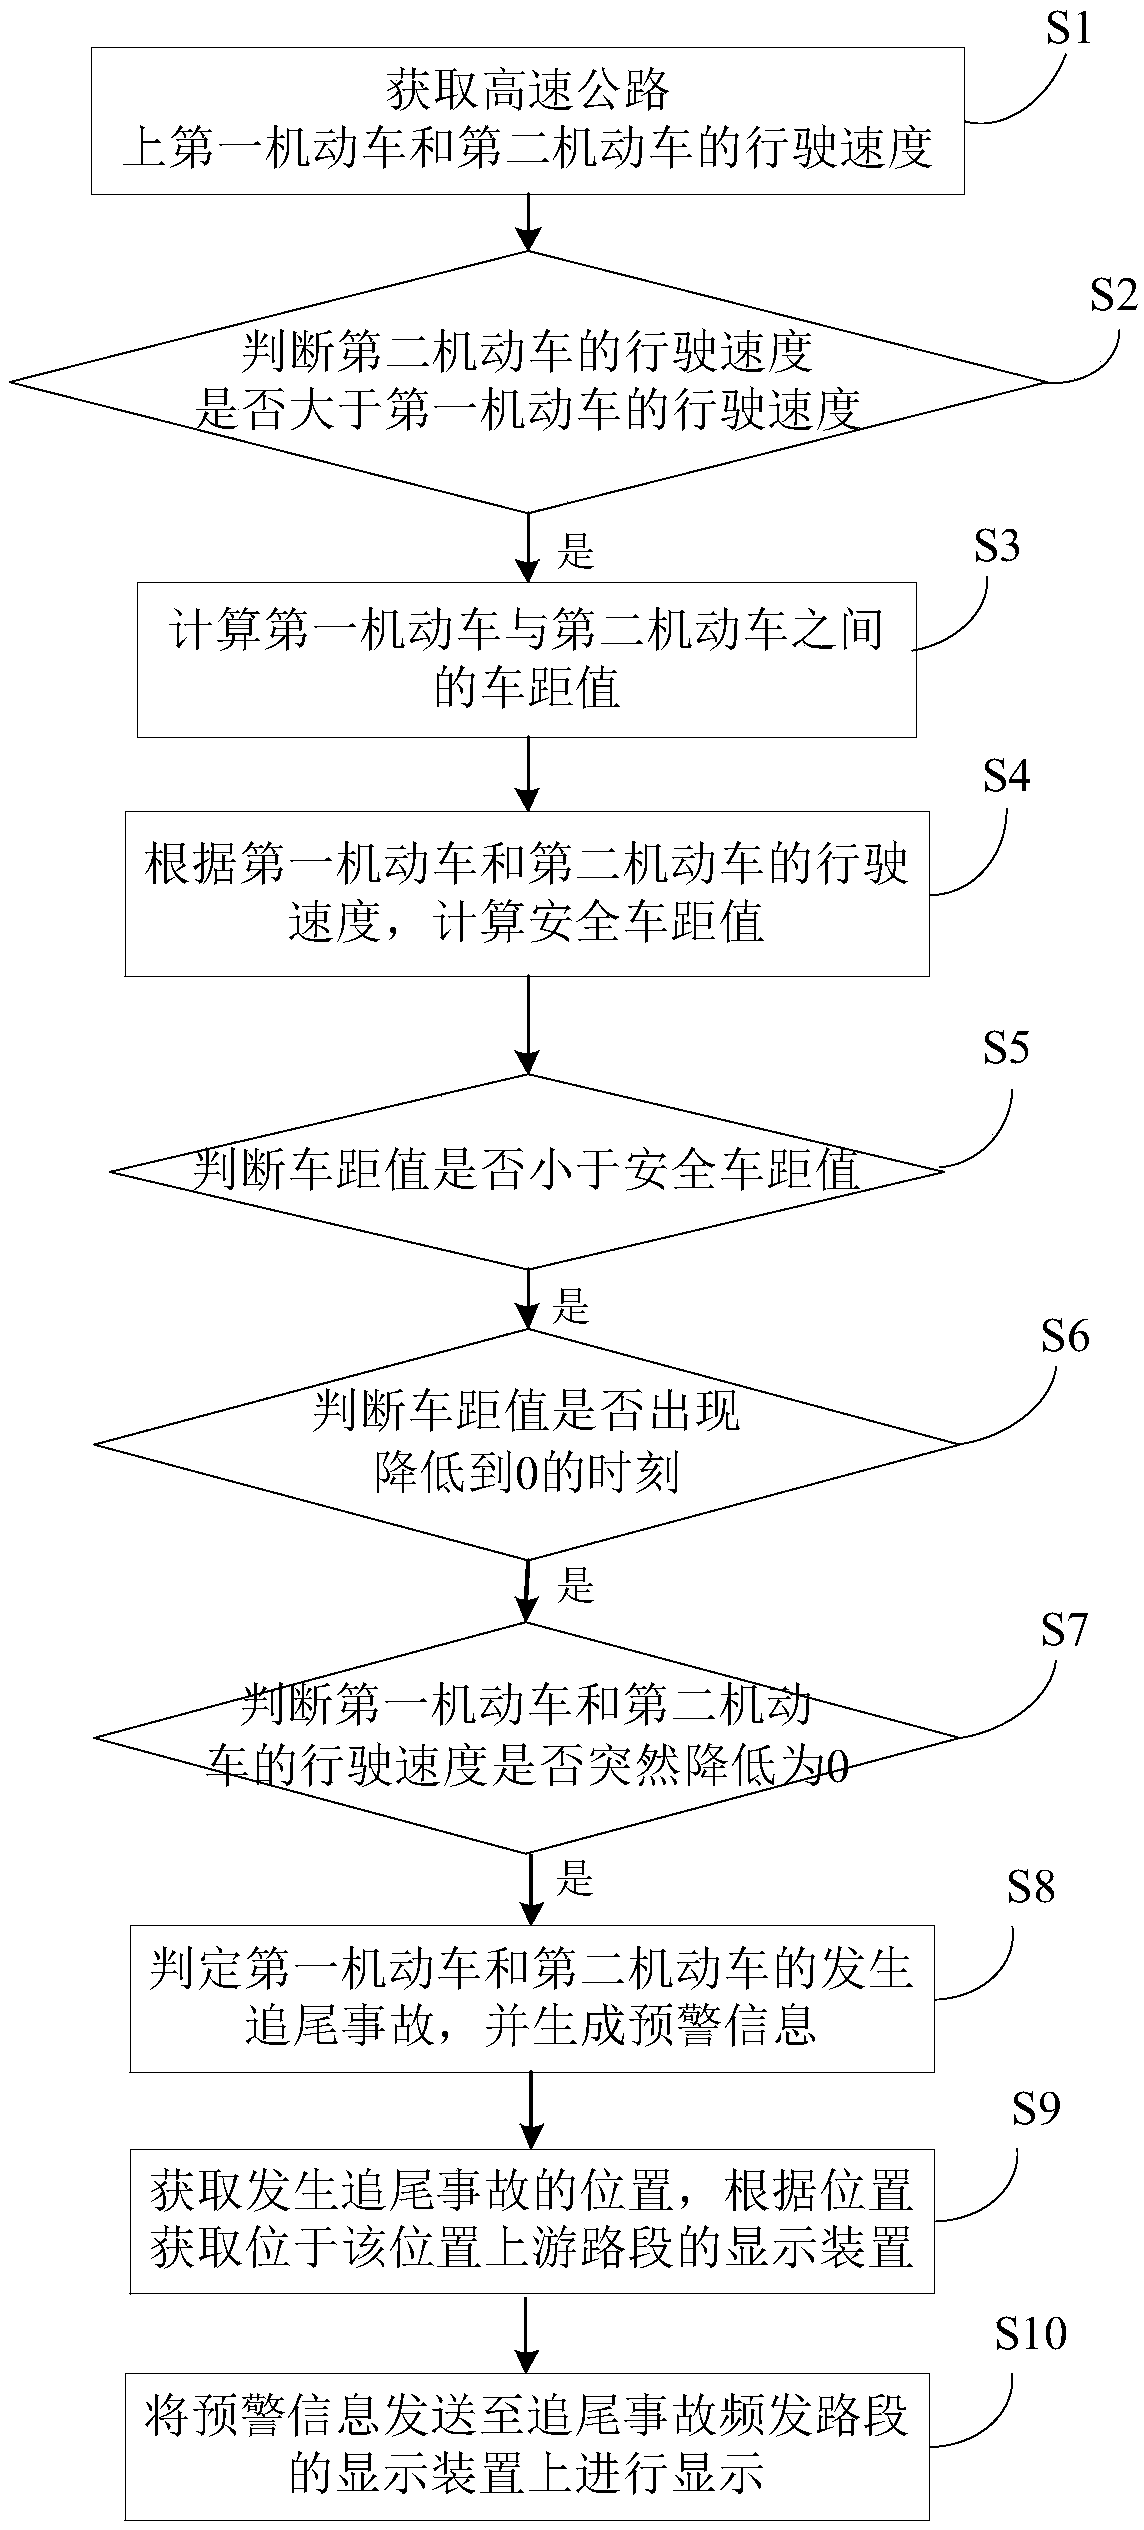 Method and system for preventing secondary traffic accidents on highway